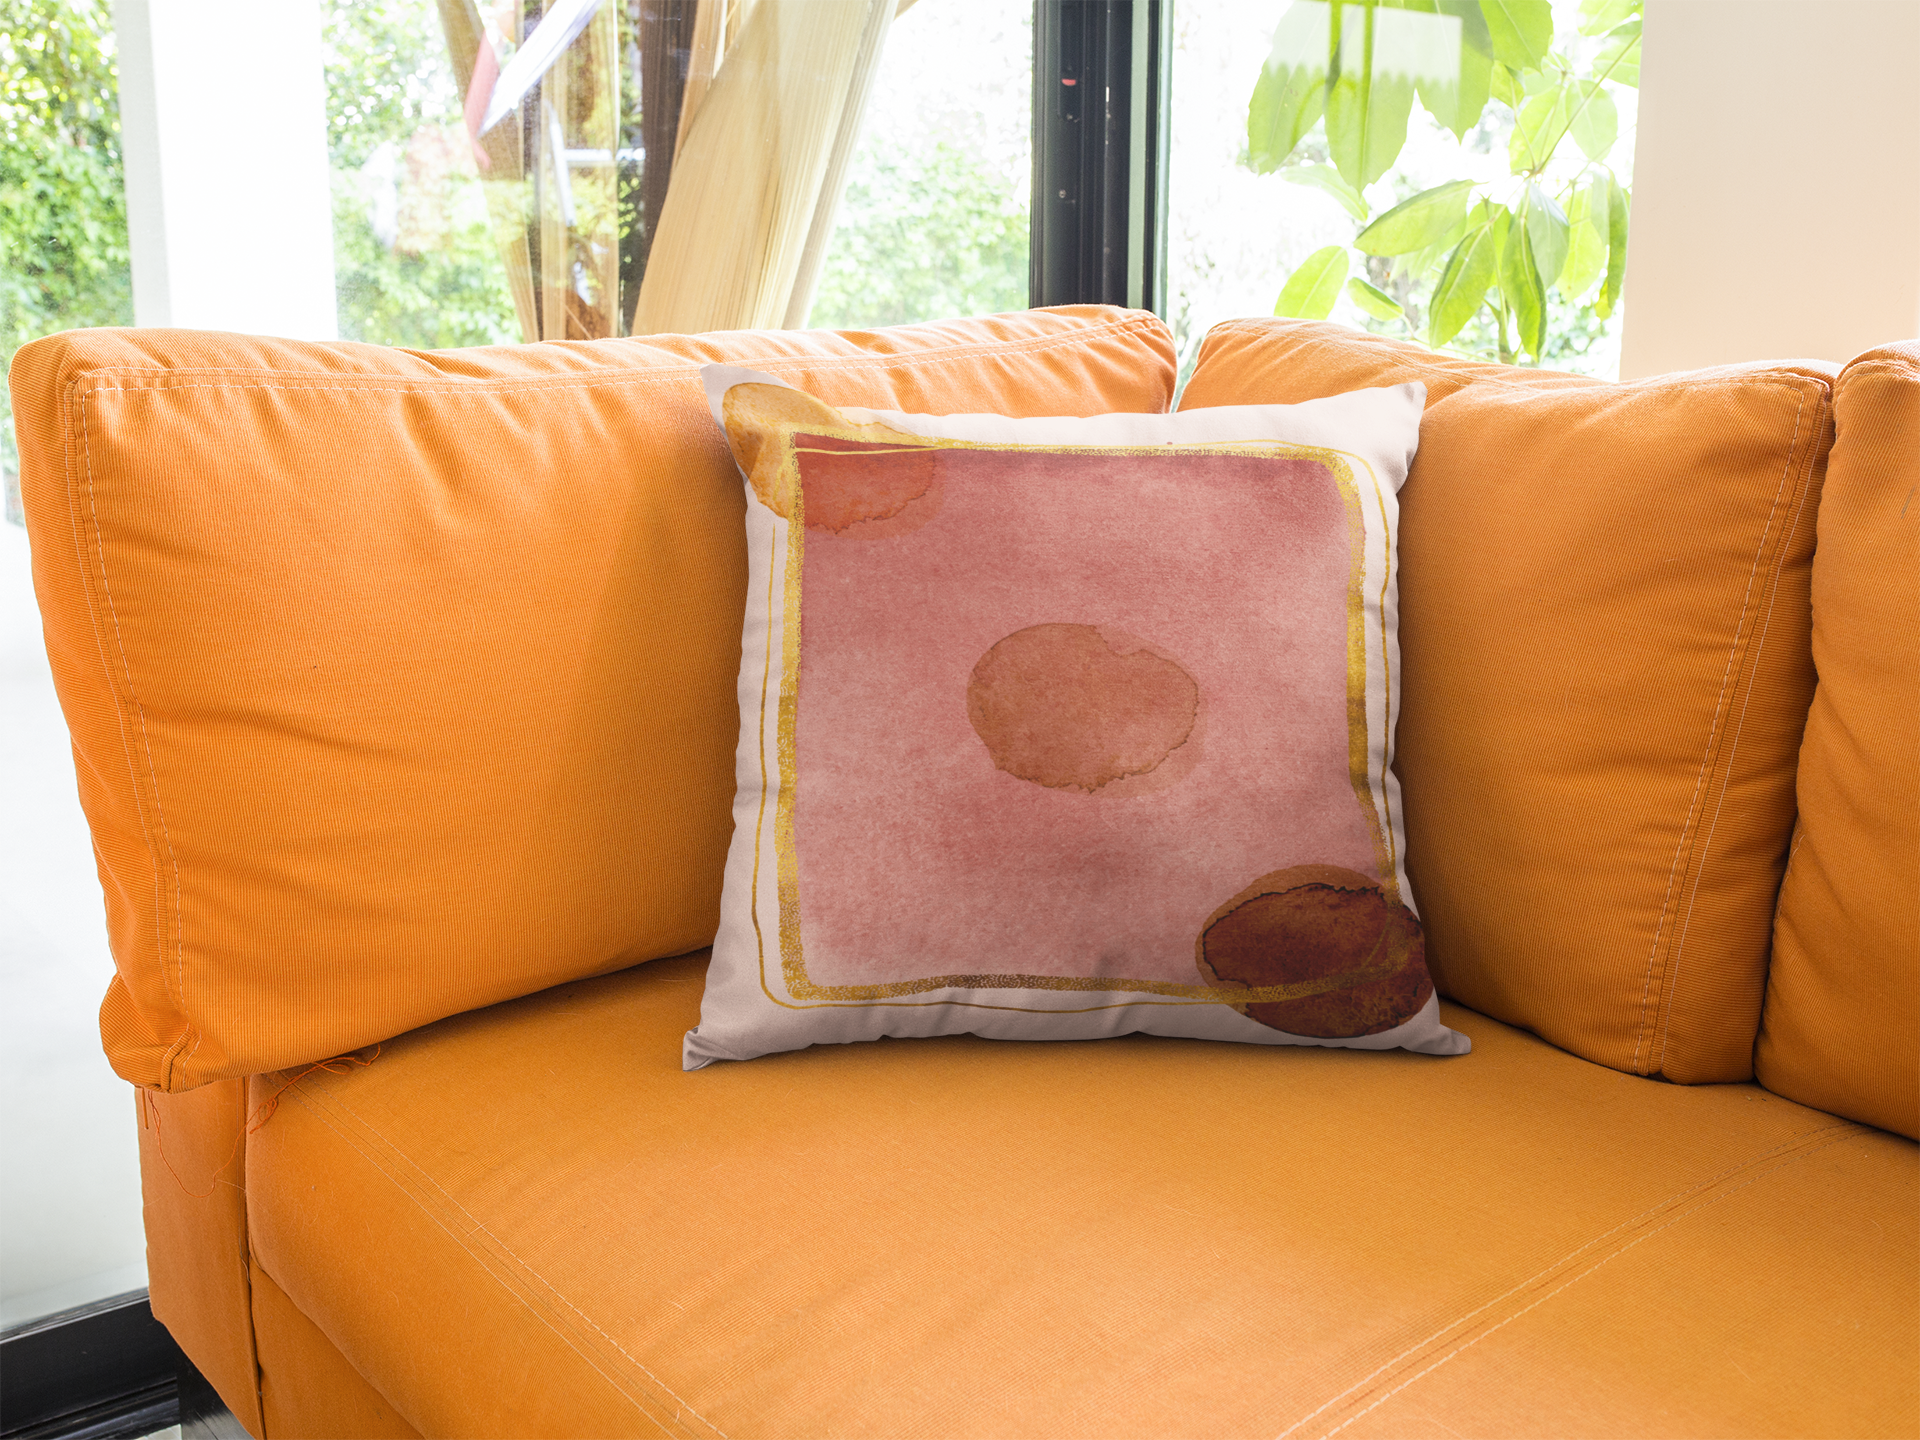 Wine Stain Pillow